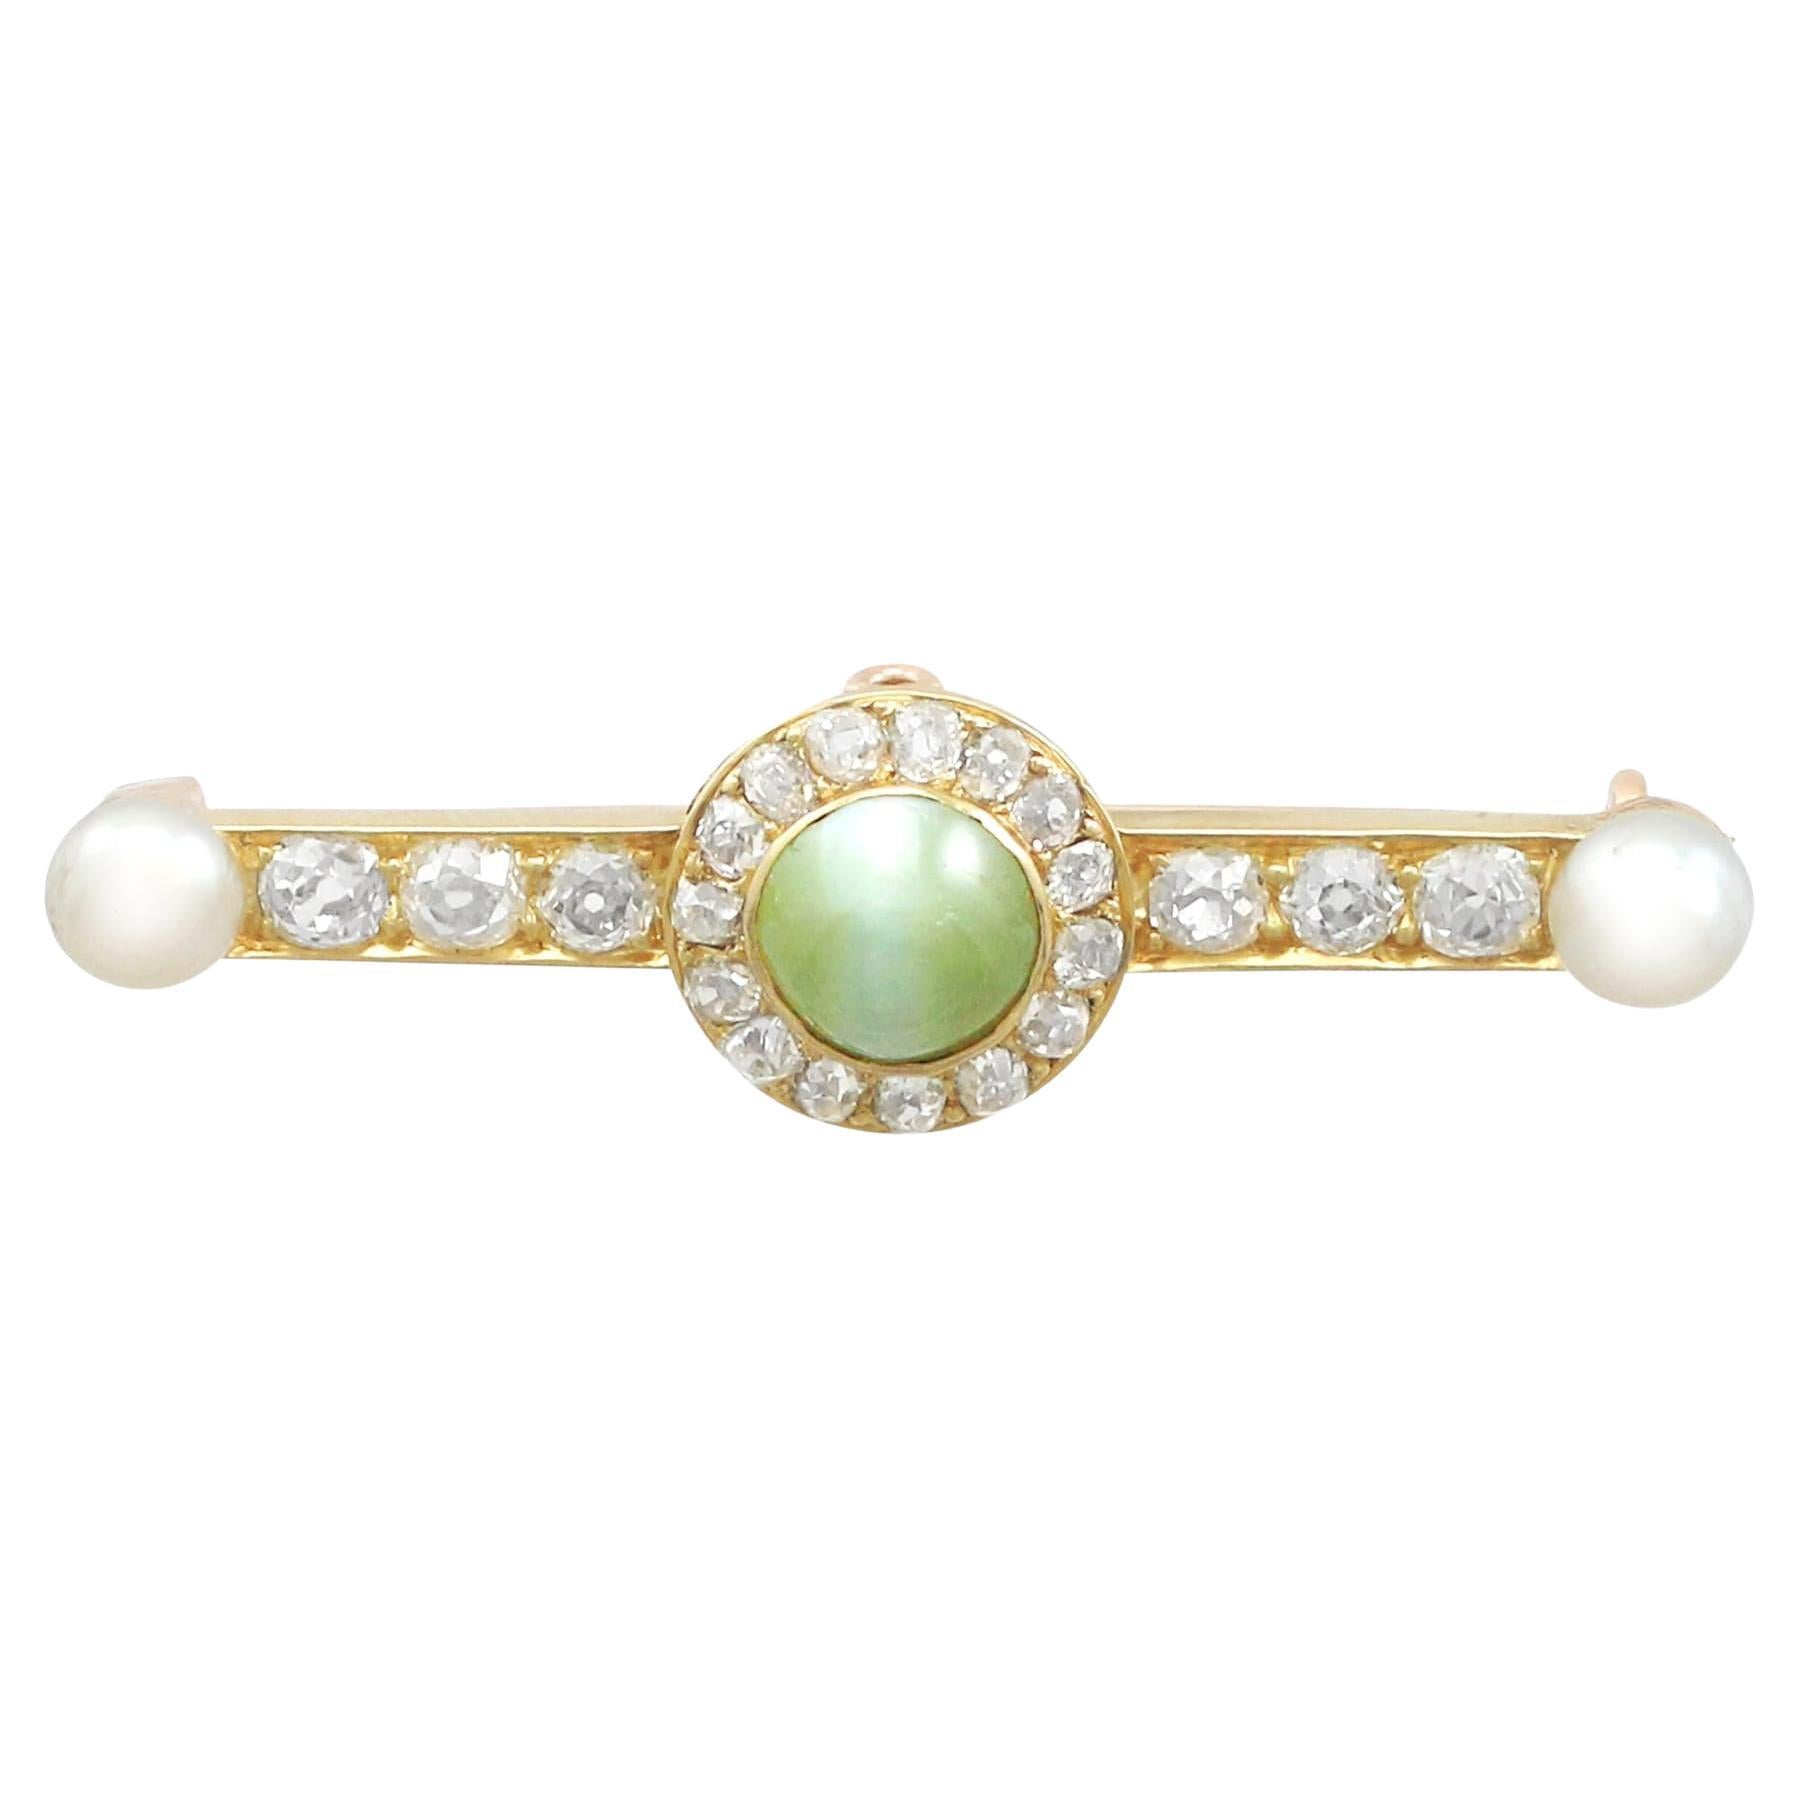 1.55Ct Cabochon Cut Chrysoberyl and 1.10Ct Diamond Pearl and Gold Bar Brooch